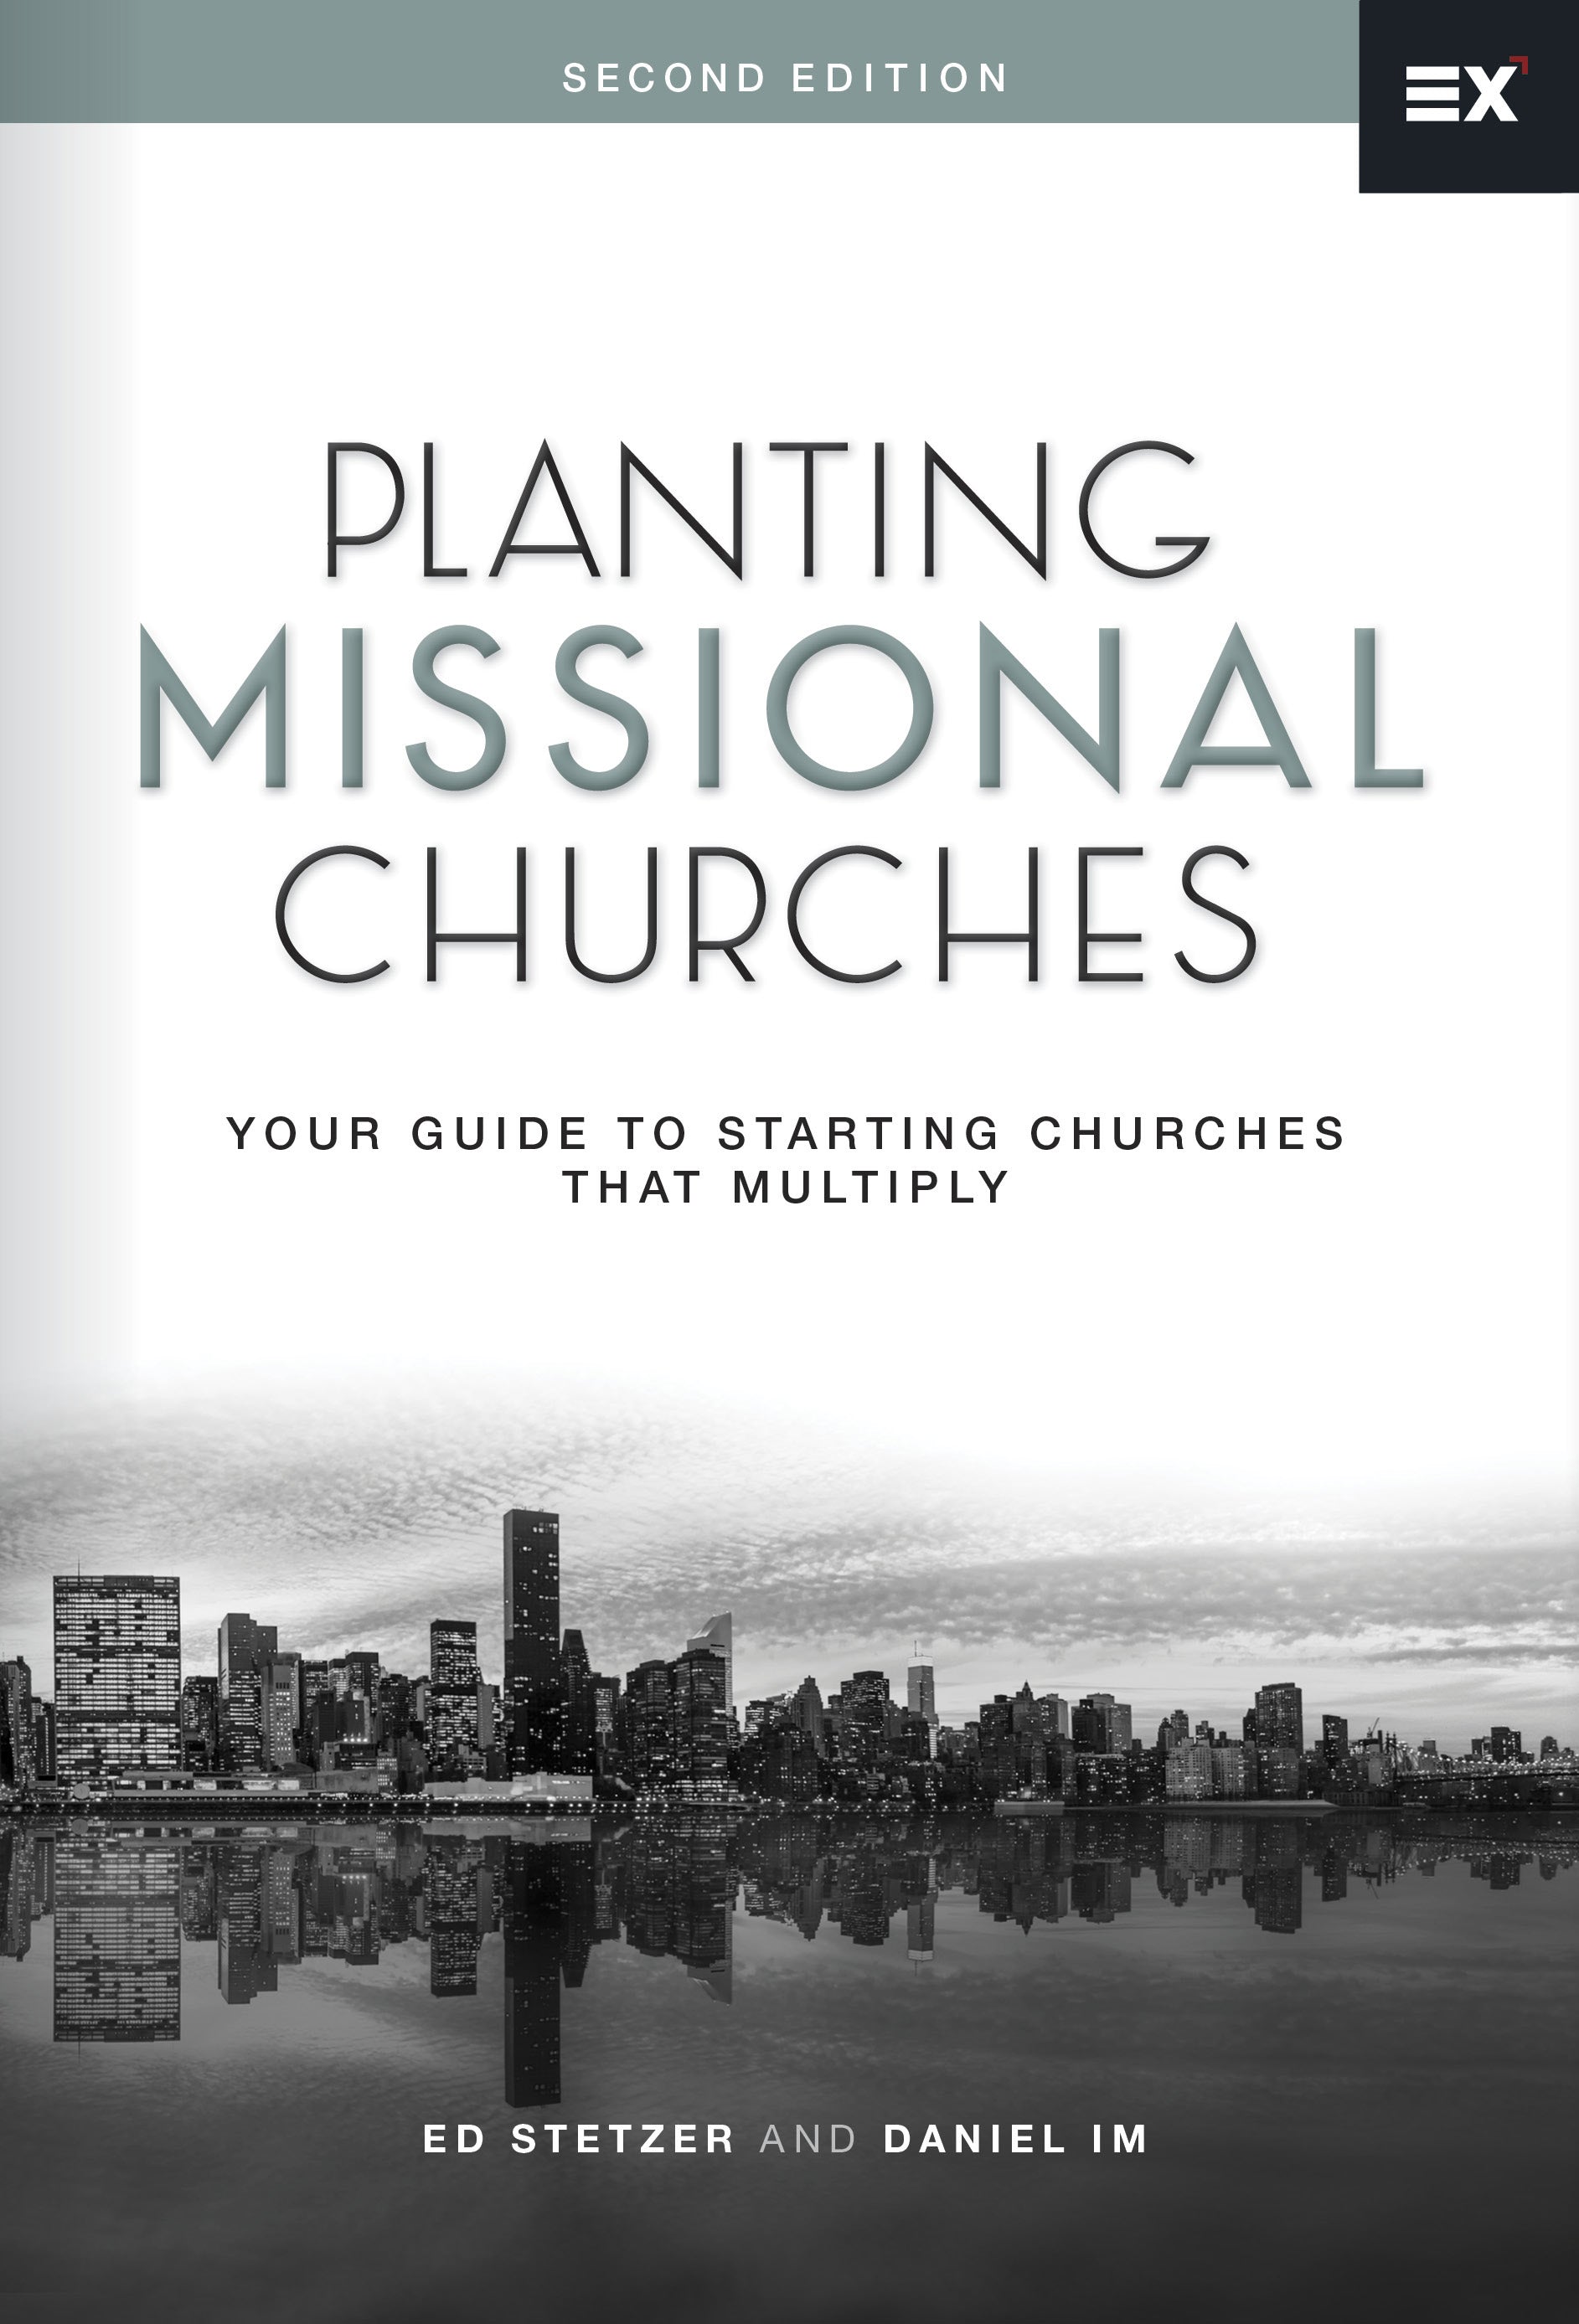 Image of Planting Missional Churches other